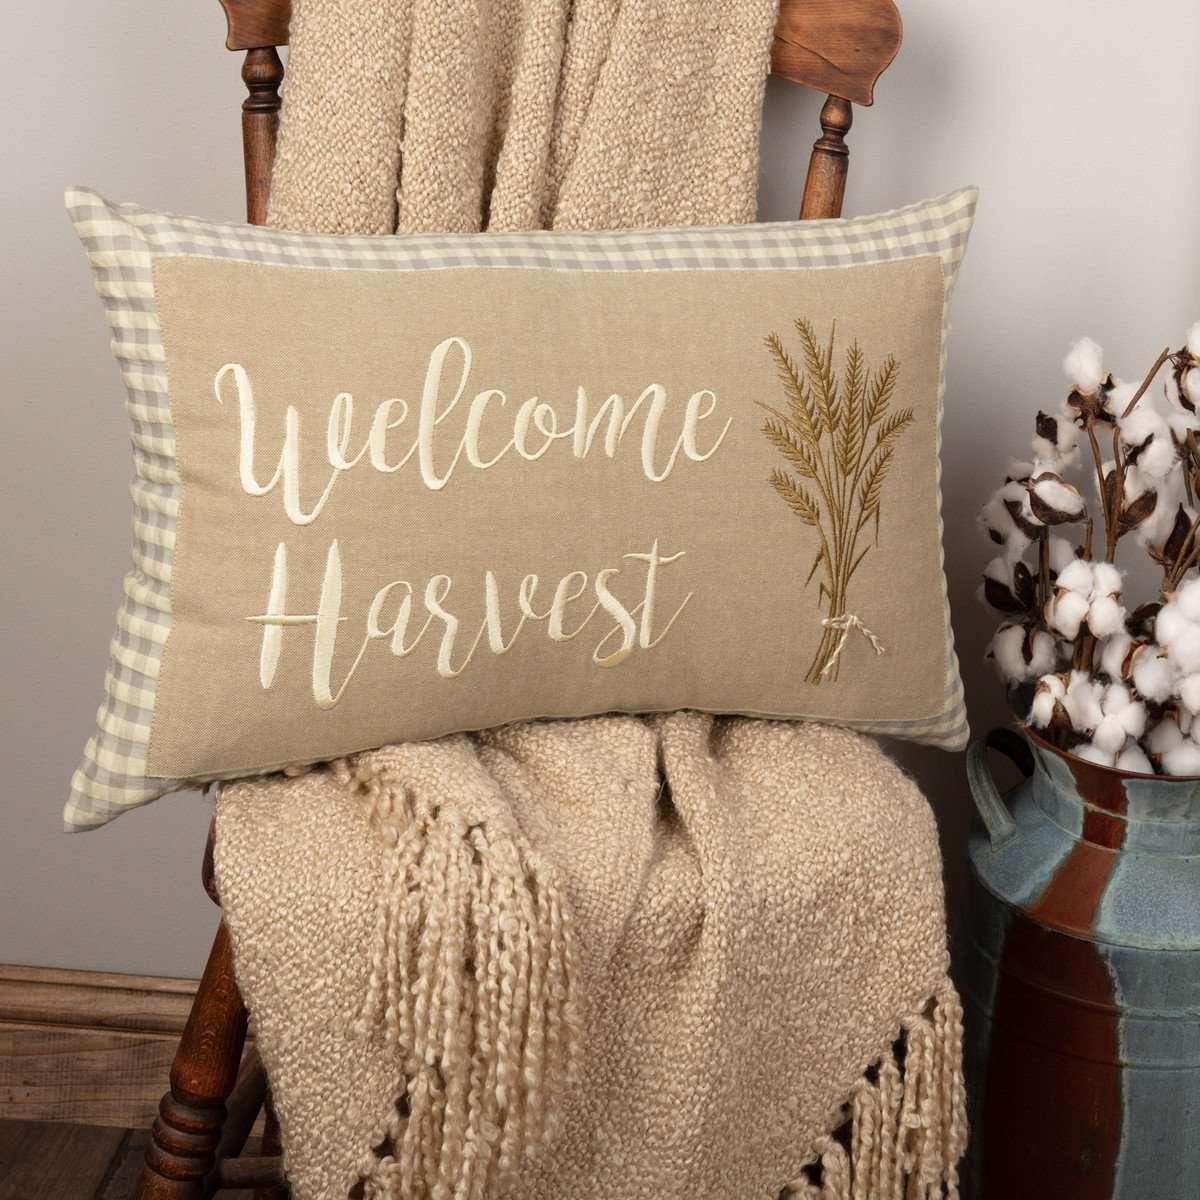 Grace Welcome Harvest Pillow 14x22 VHC Brands